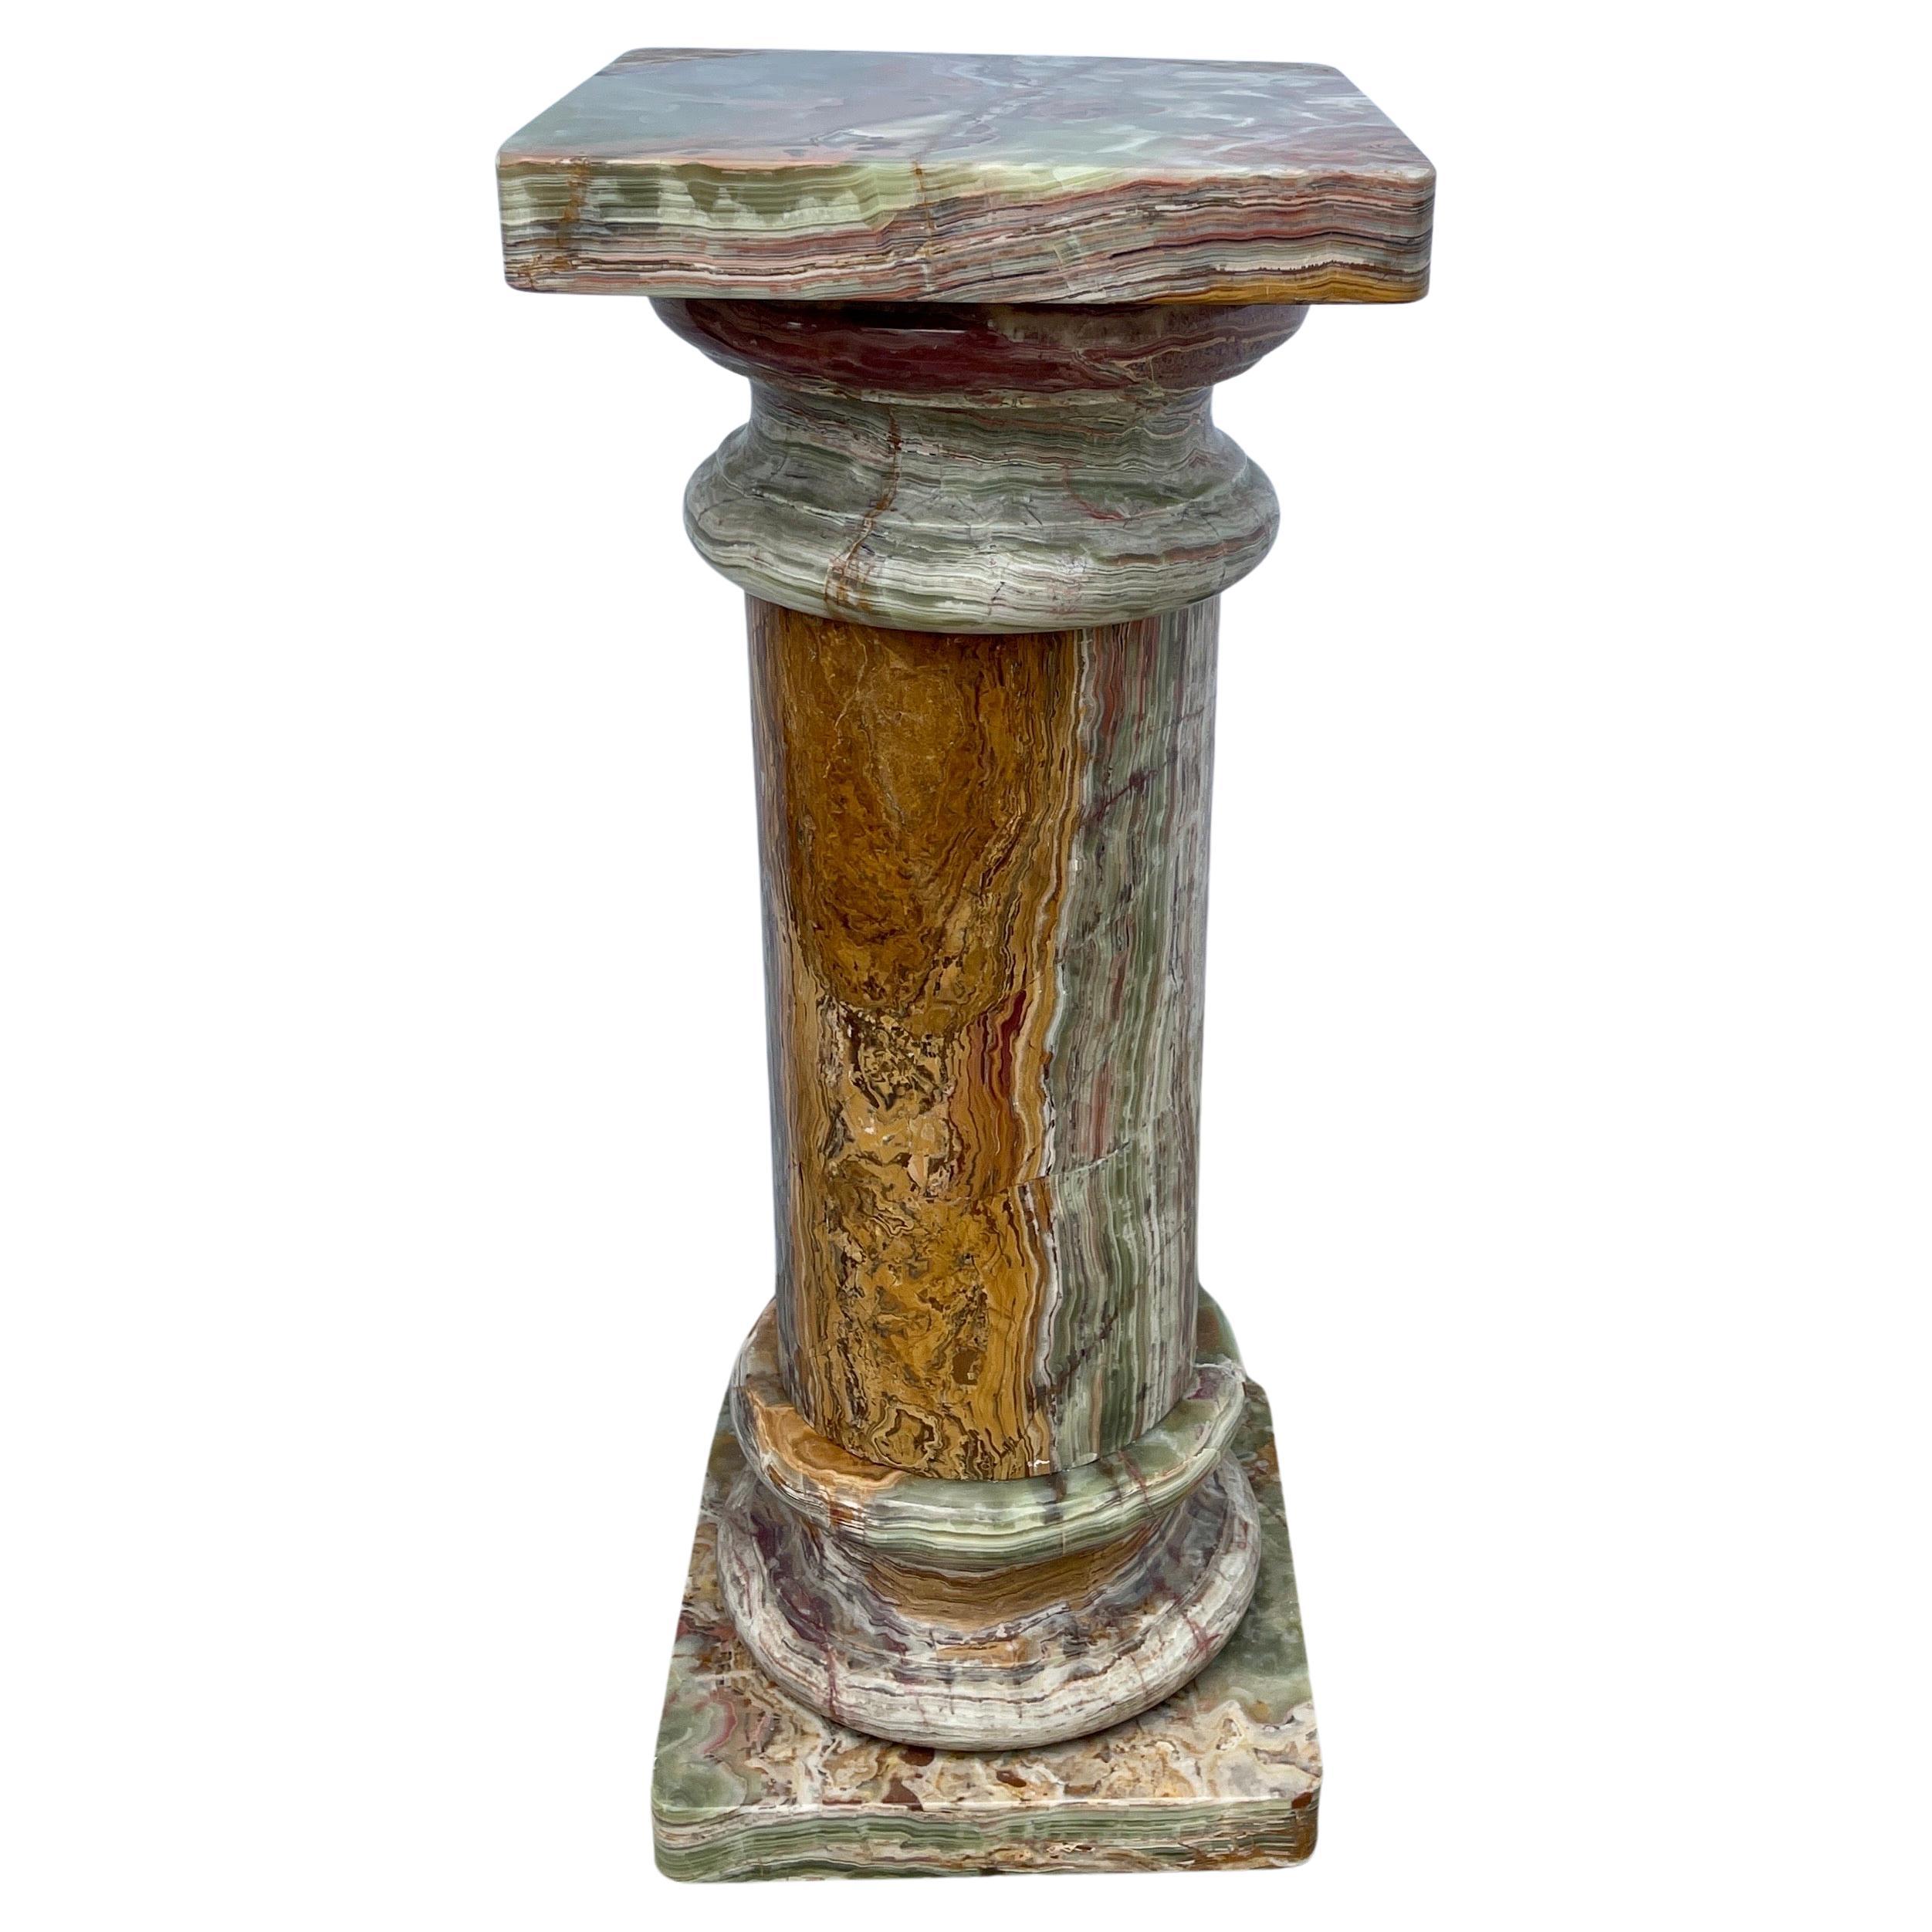 Large 20th Century Turned Onyx Pedestal Marble Column, Italy 1980's.
This amazing five piece pedestal has mostly a green, white and rust colored scheme.
